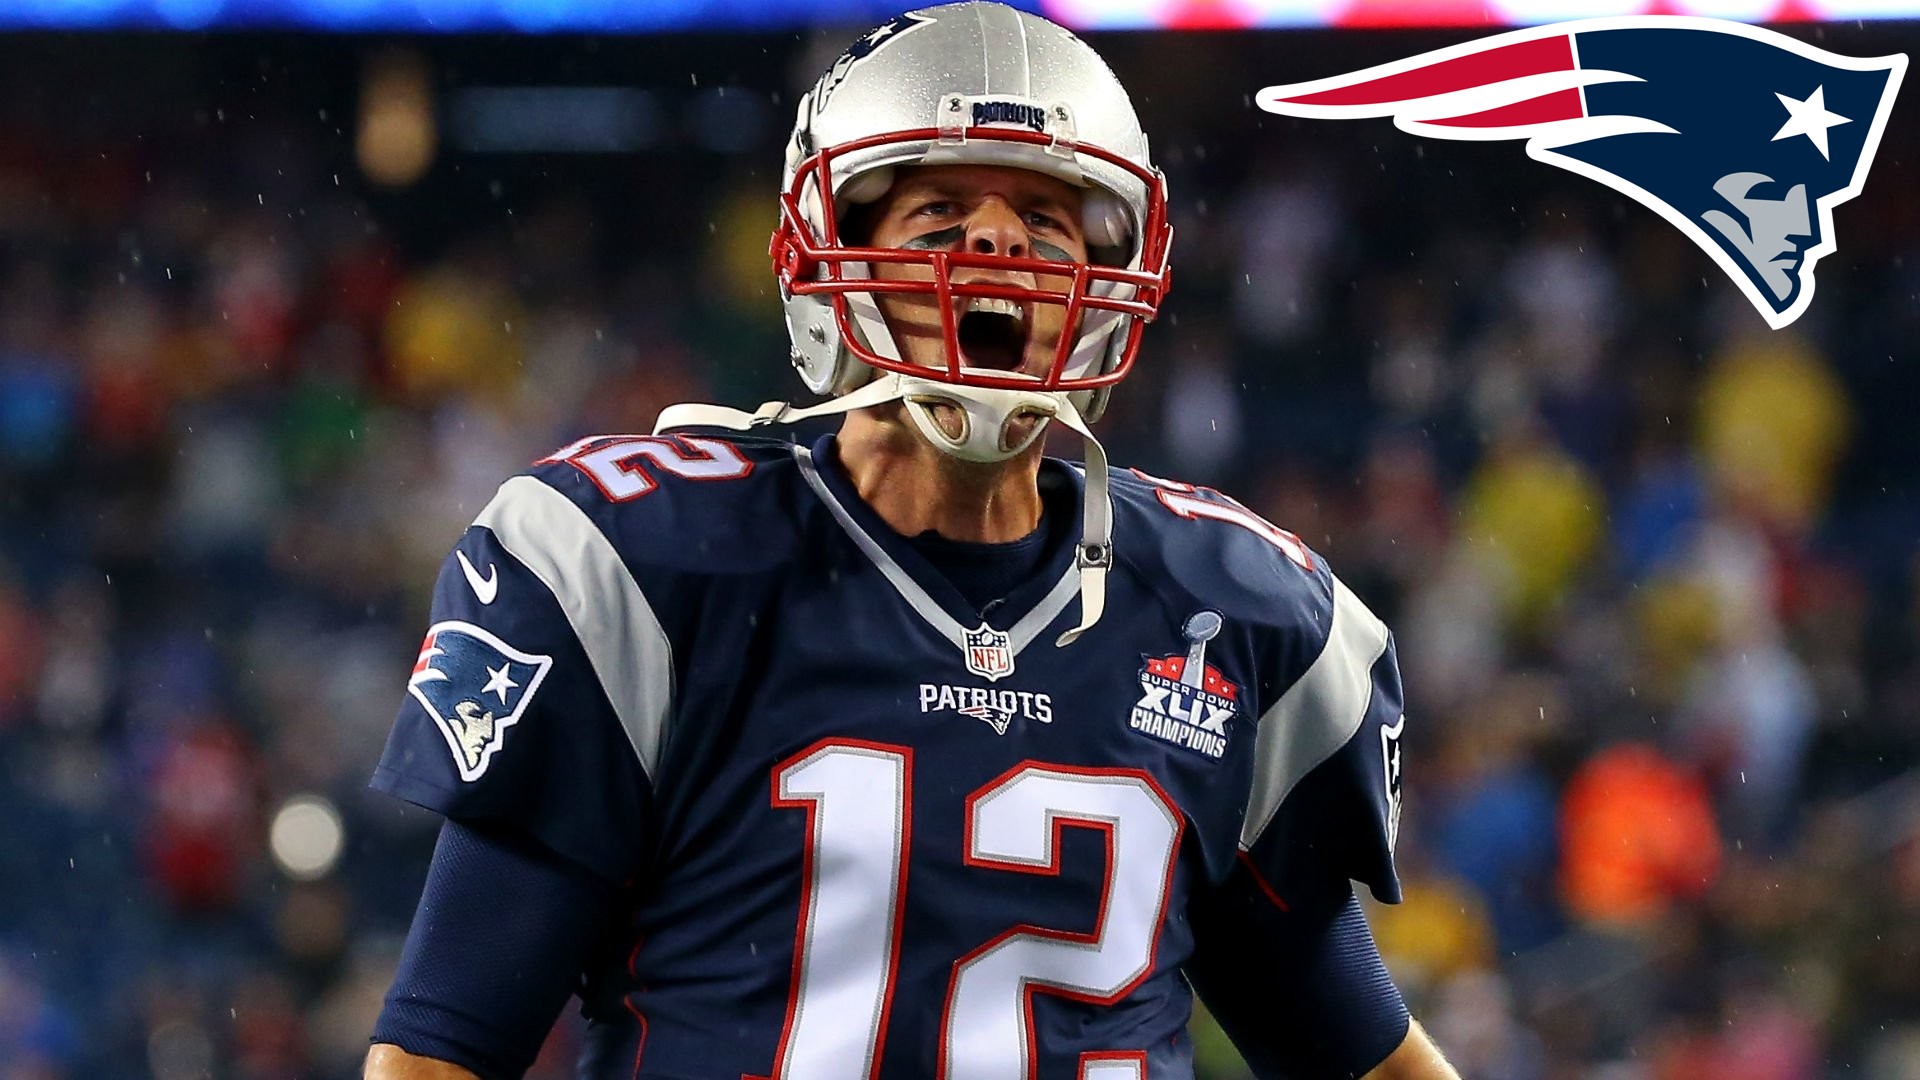 Wallpaper Desktop Tom Brady Super Bowl HD with resolution 1920x1080 pixel. You can make this wallpaper for your Mac or Windows Desktop Background, iPhone, Android or Tablet and another Smartphone device